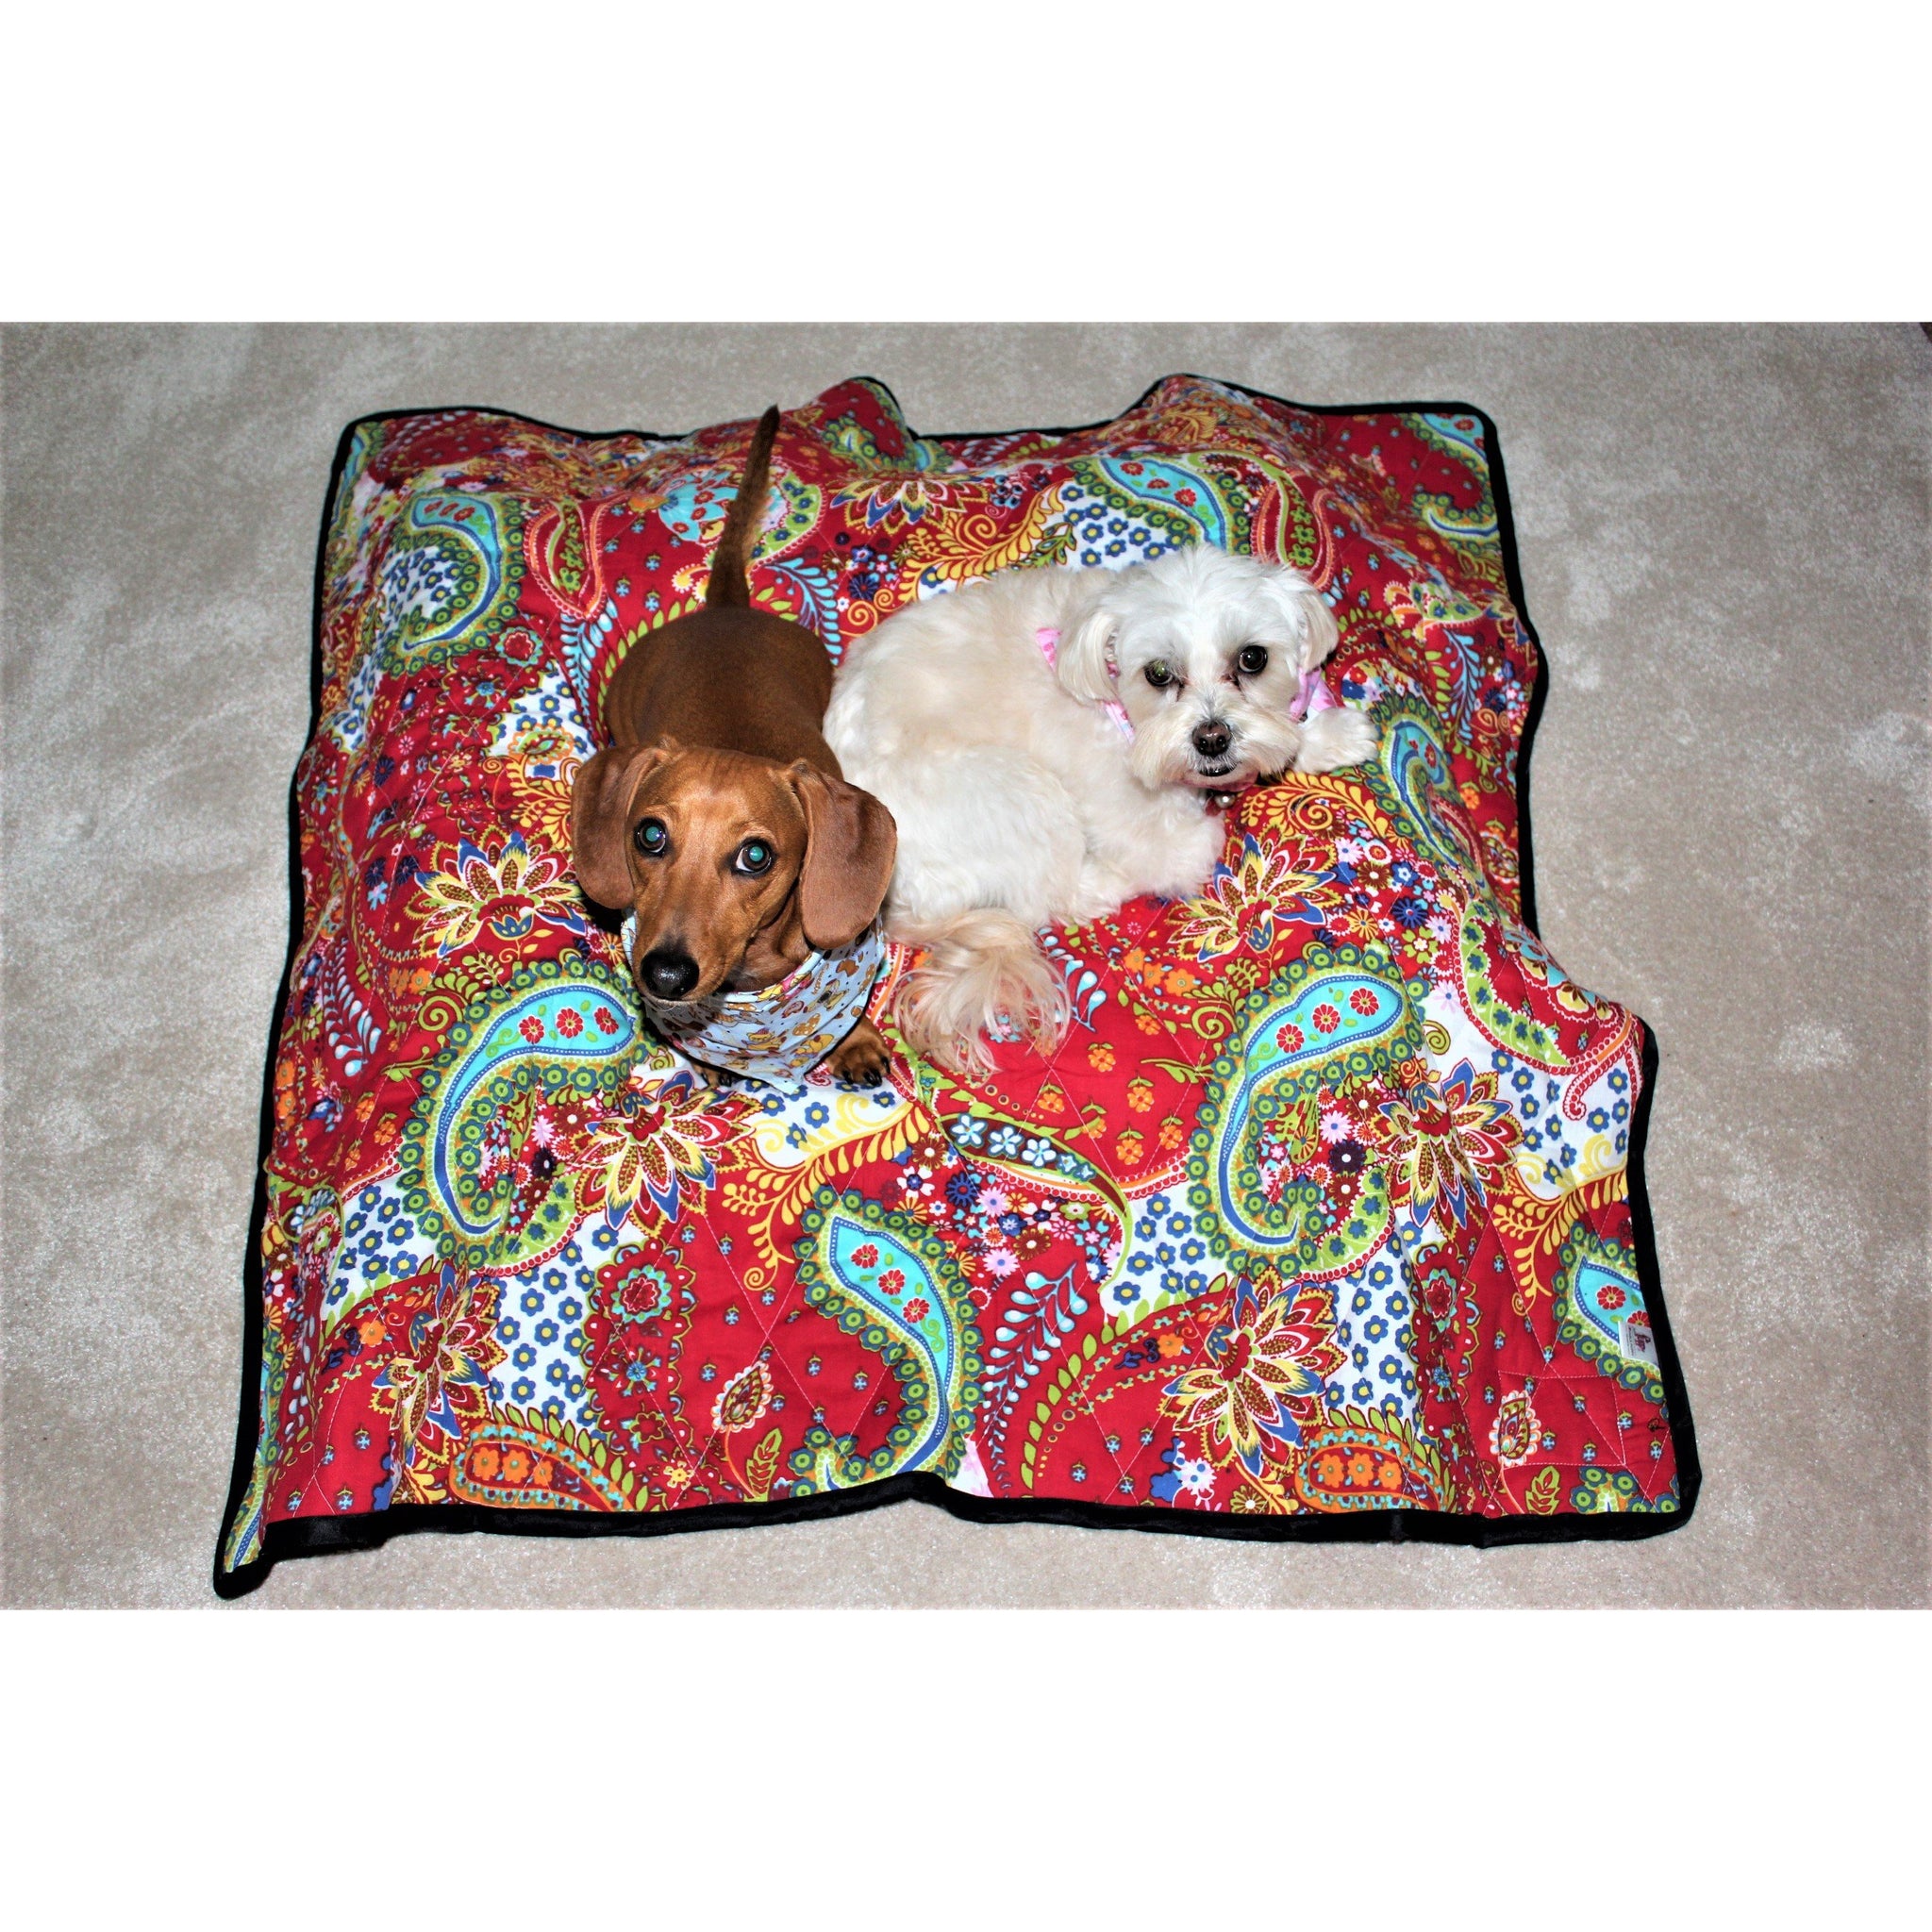 Max and Gracie Dogs in Quilted Blanket